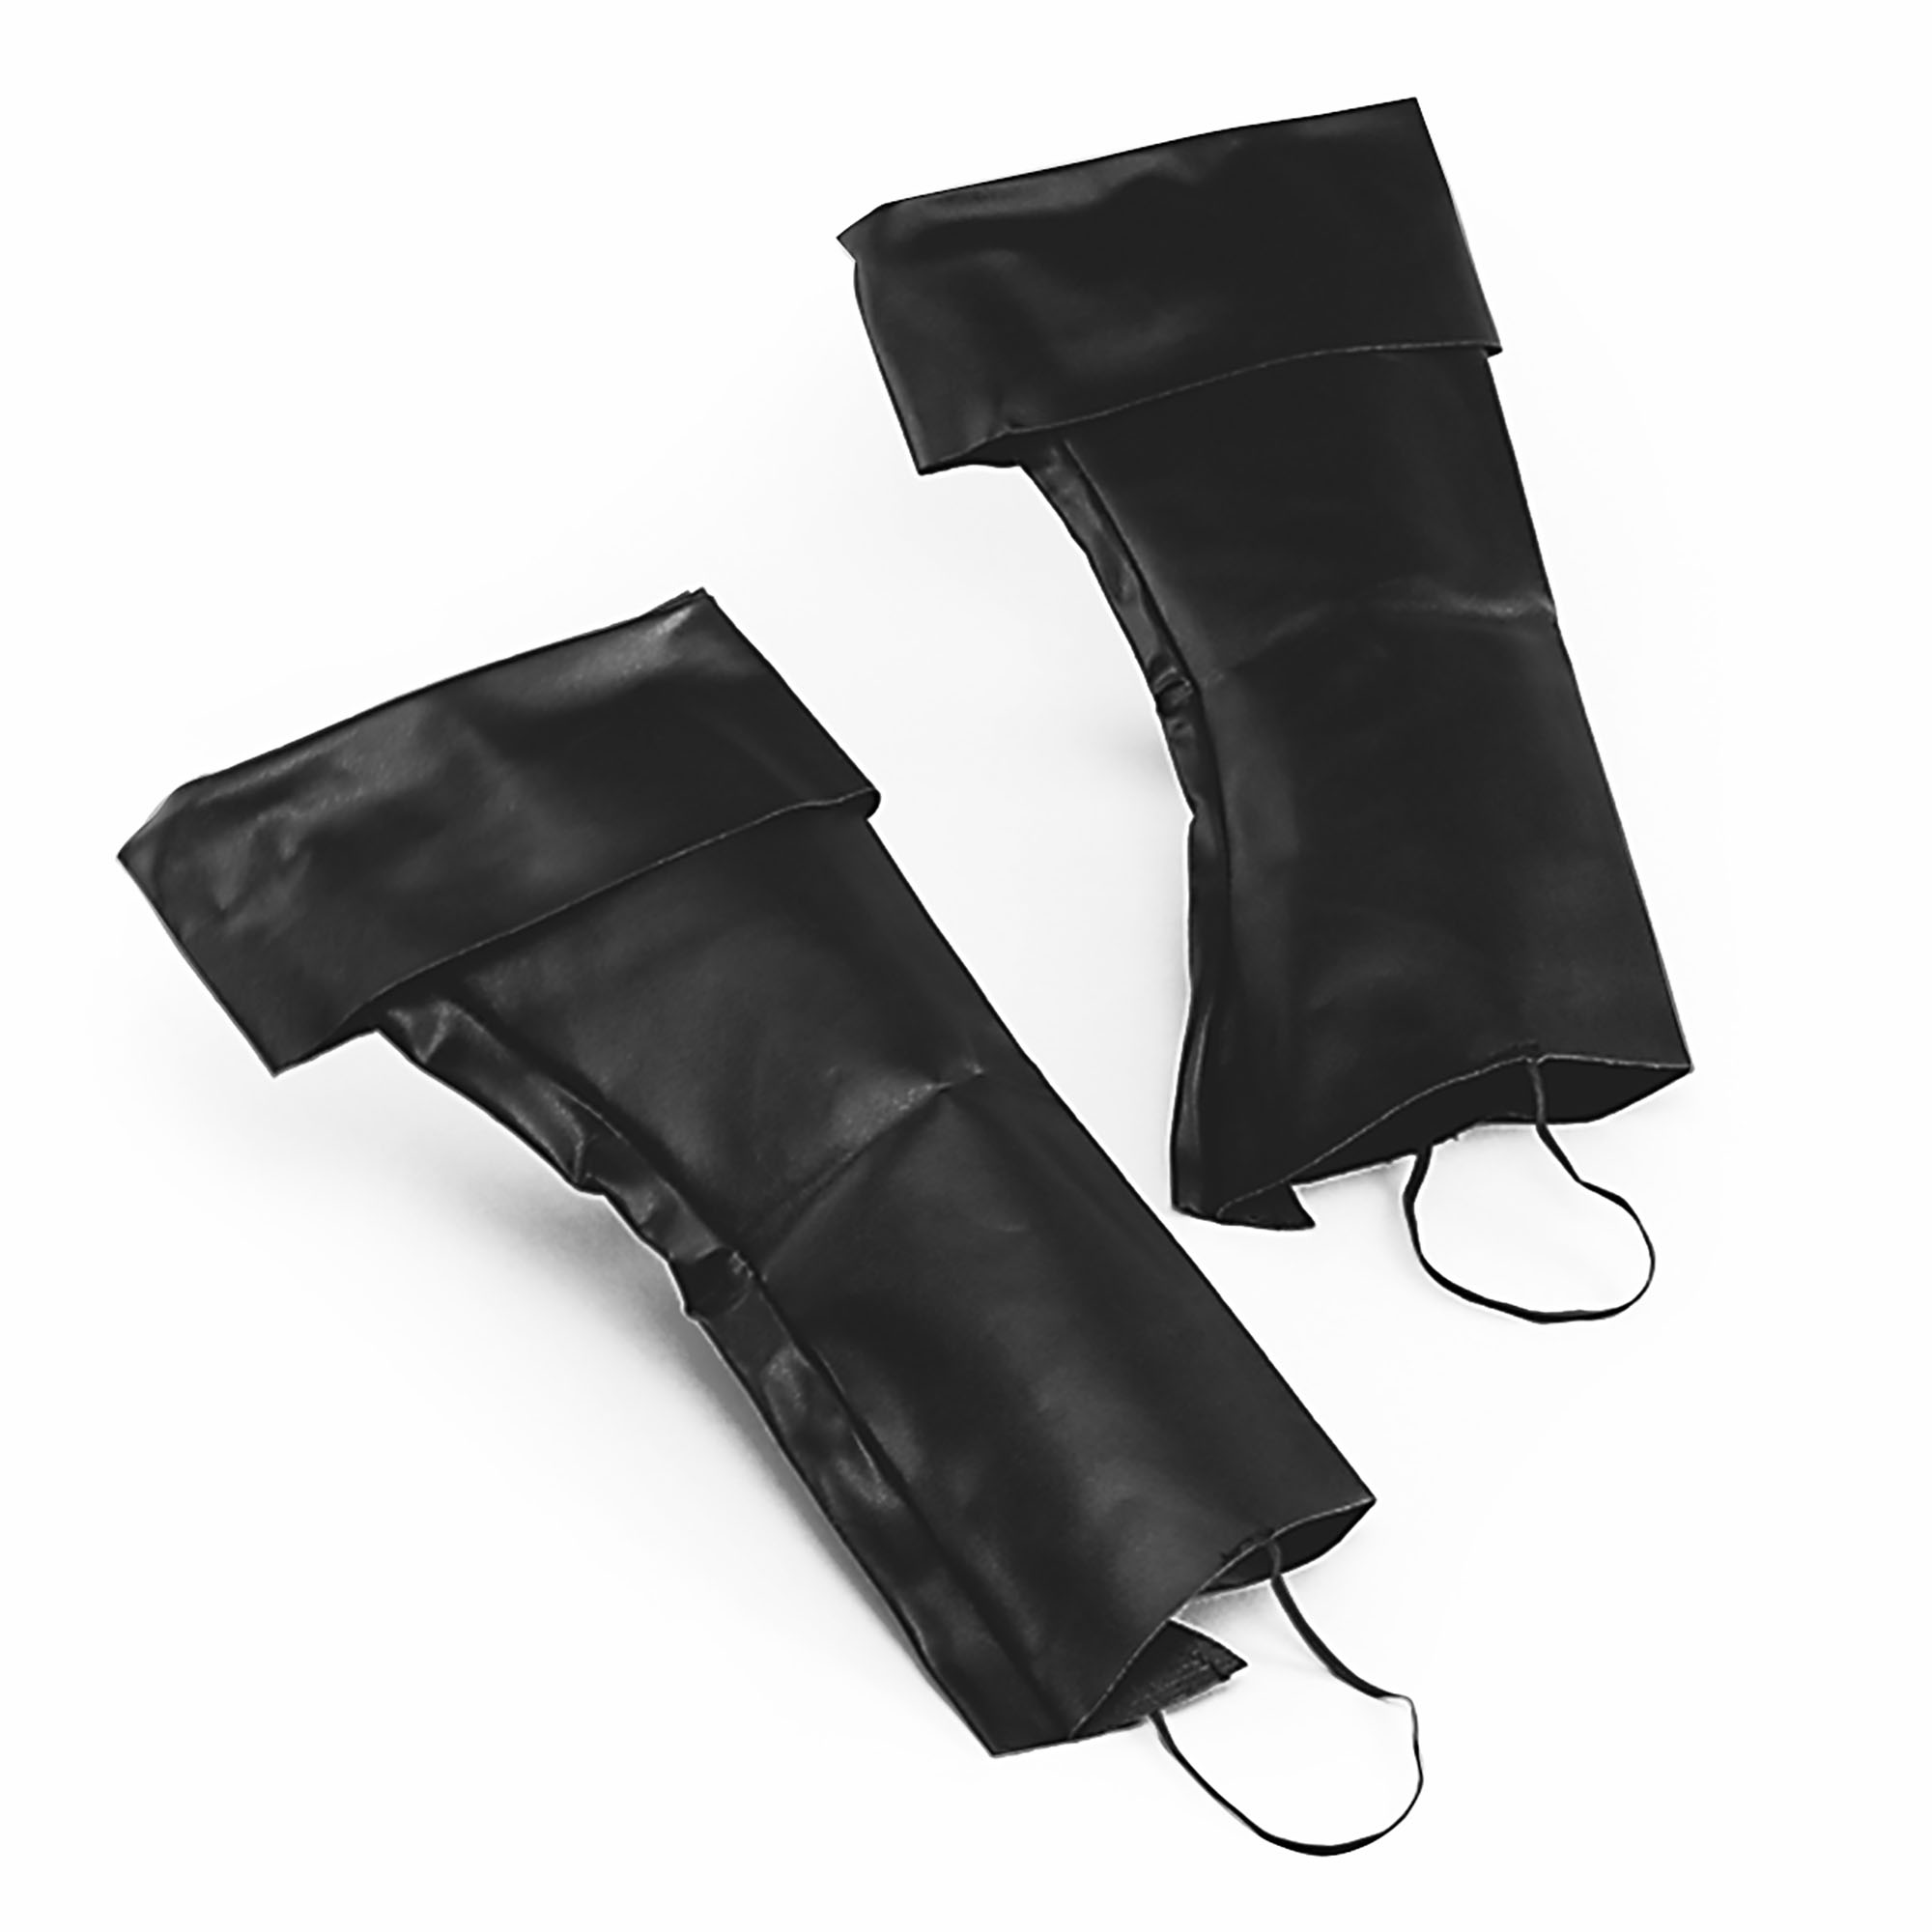 ACCESSORIES/LEGWARMERS & BOOTCOVERS/PIRATE BOOT COVERS